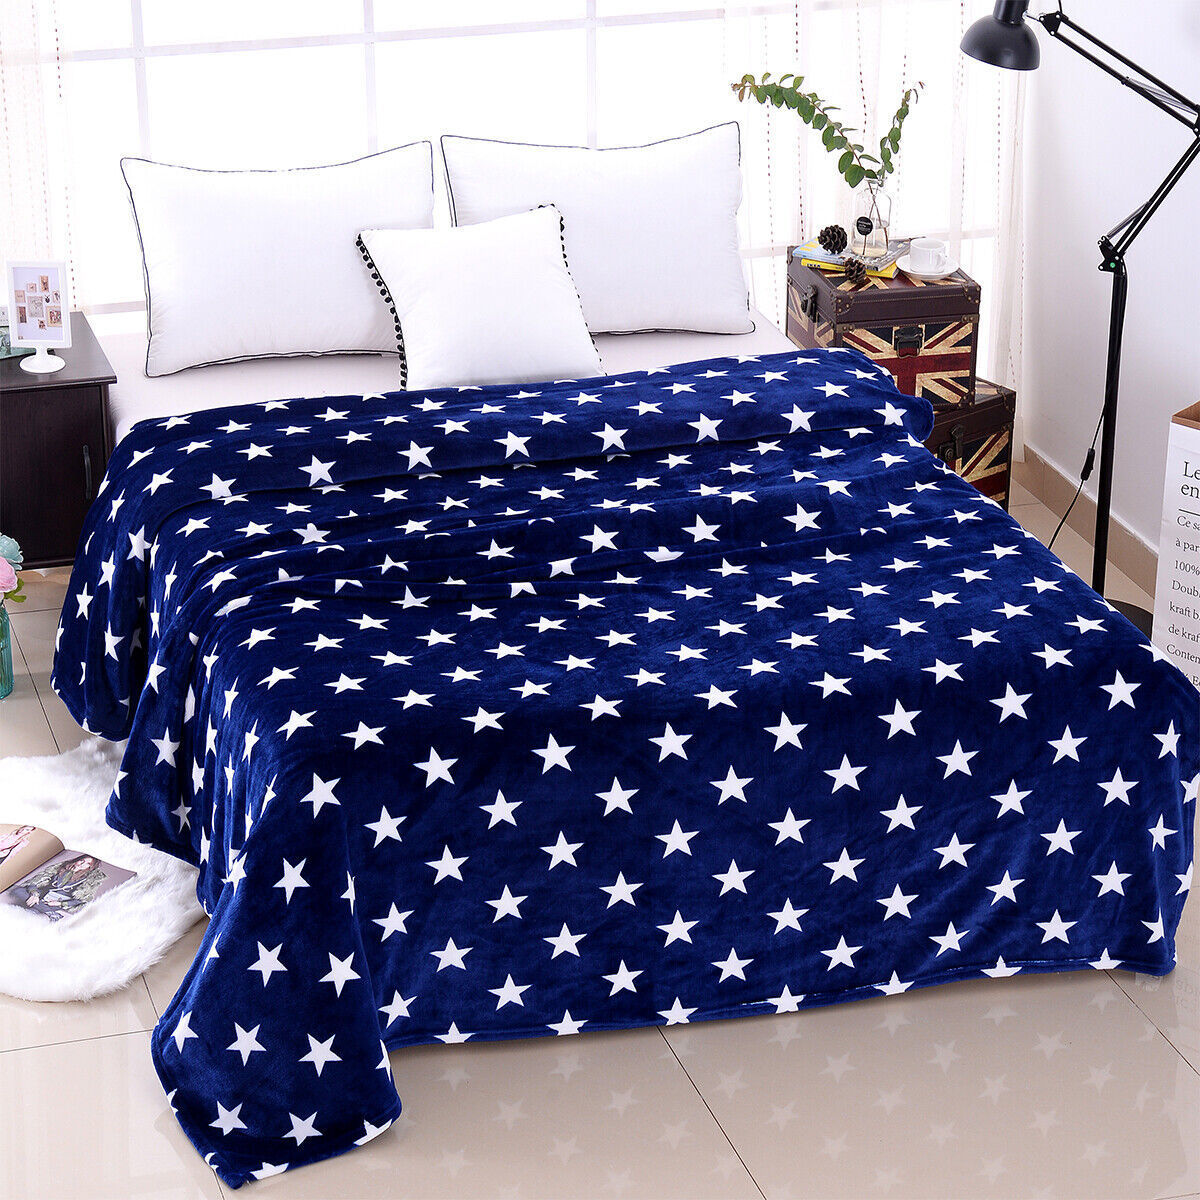 Navy Star New light weight Throw Flannel Blanket King Size - $65.98